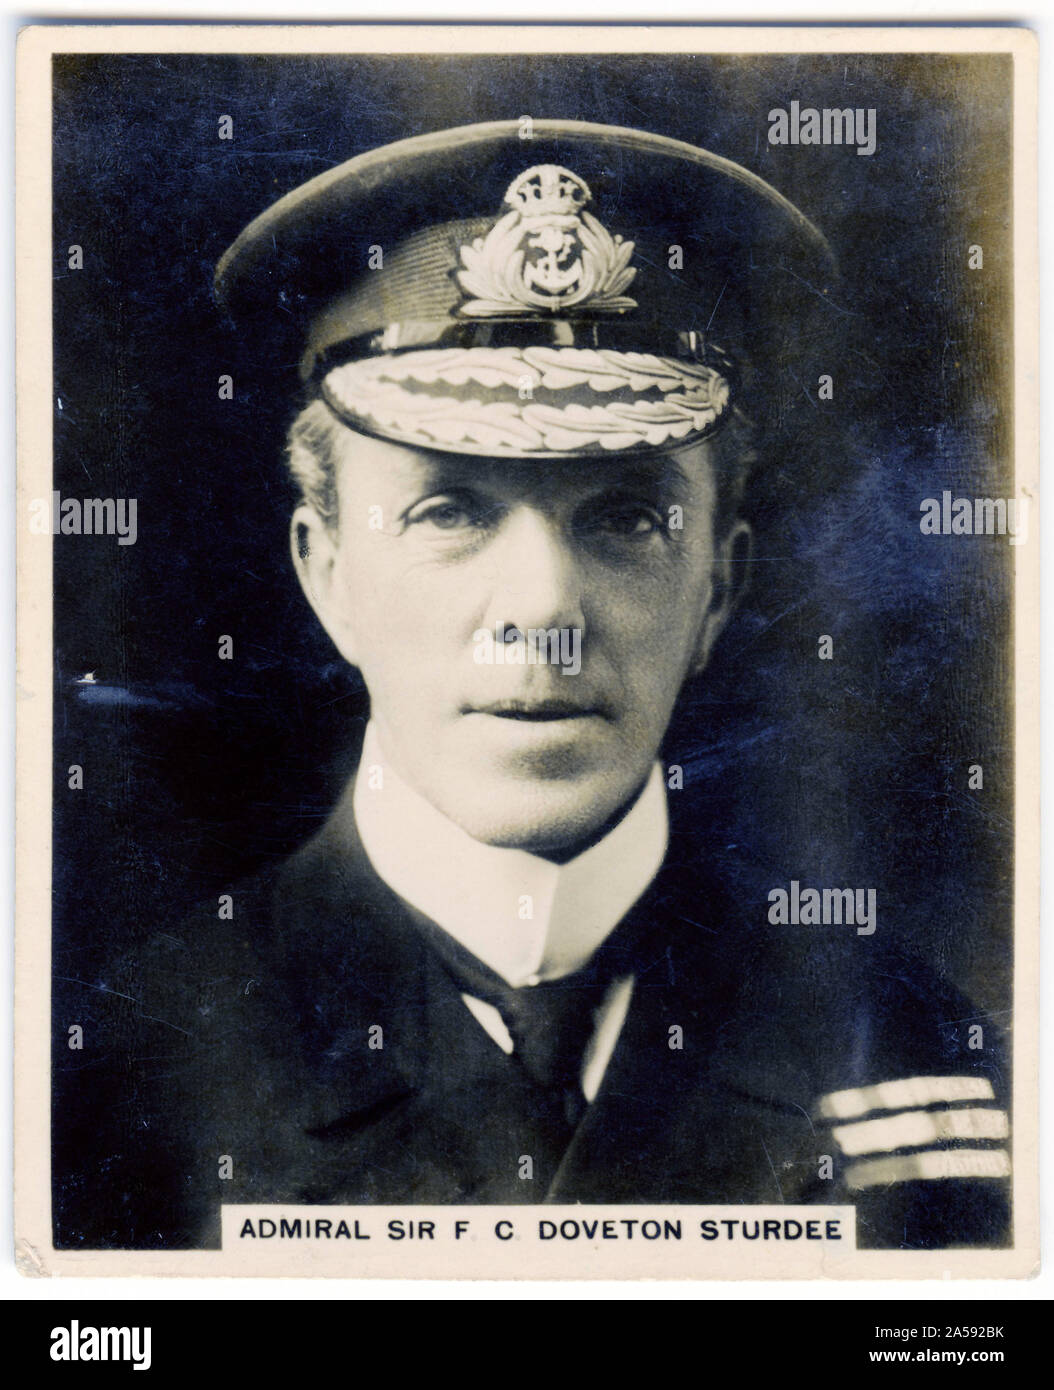 Cigarette card portrait of Admiral of the Fleet Sir Frederick Charles Doveton Sturdee, 1st Baronet GCB, KCMG, CVO (1859 – 1925). After training as a torpedo officer, he commanded two different cruisers and then three different battleships before becoming commander of the 1st Battle Squadron of the Home Fleet. He later  commanded the 3rd and 2nd Cruiser Squadrons. Stock Photo